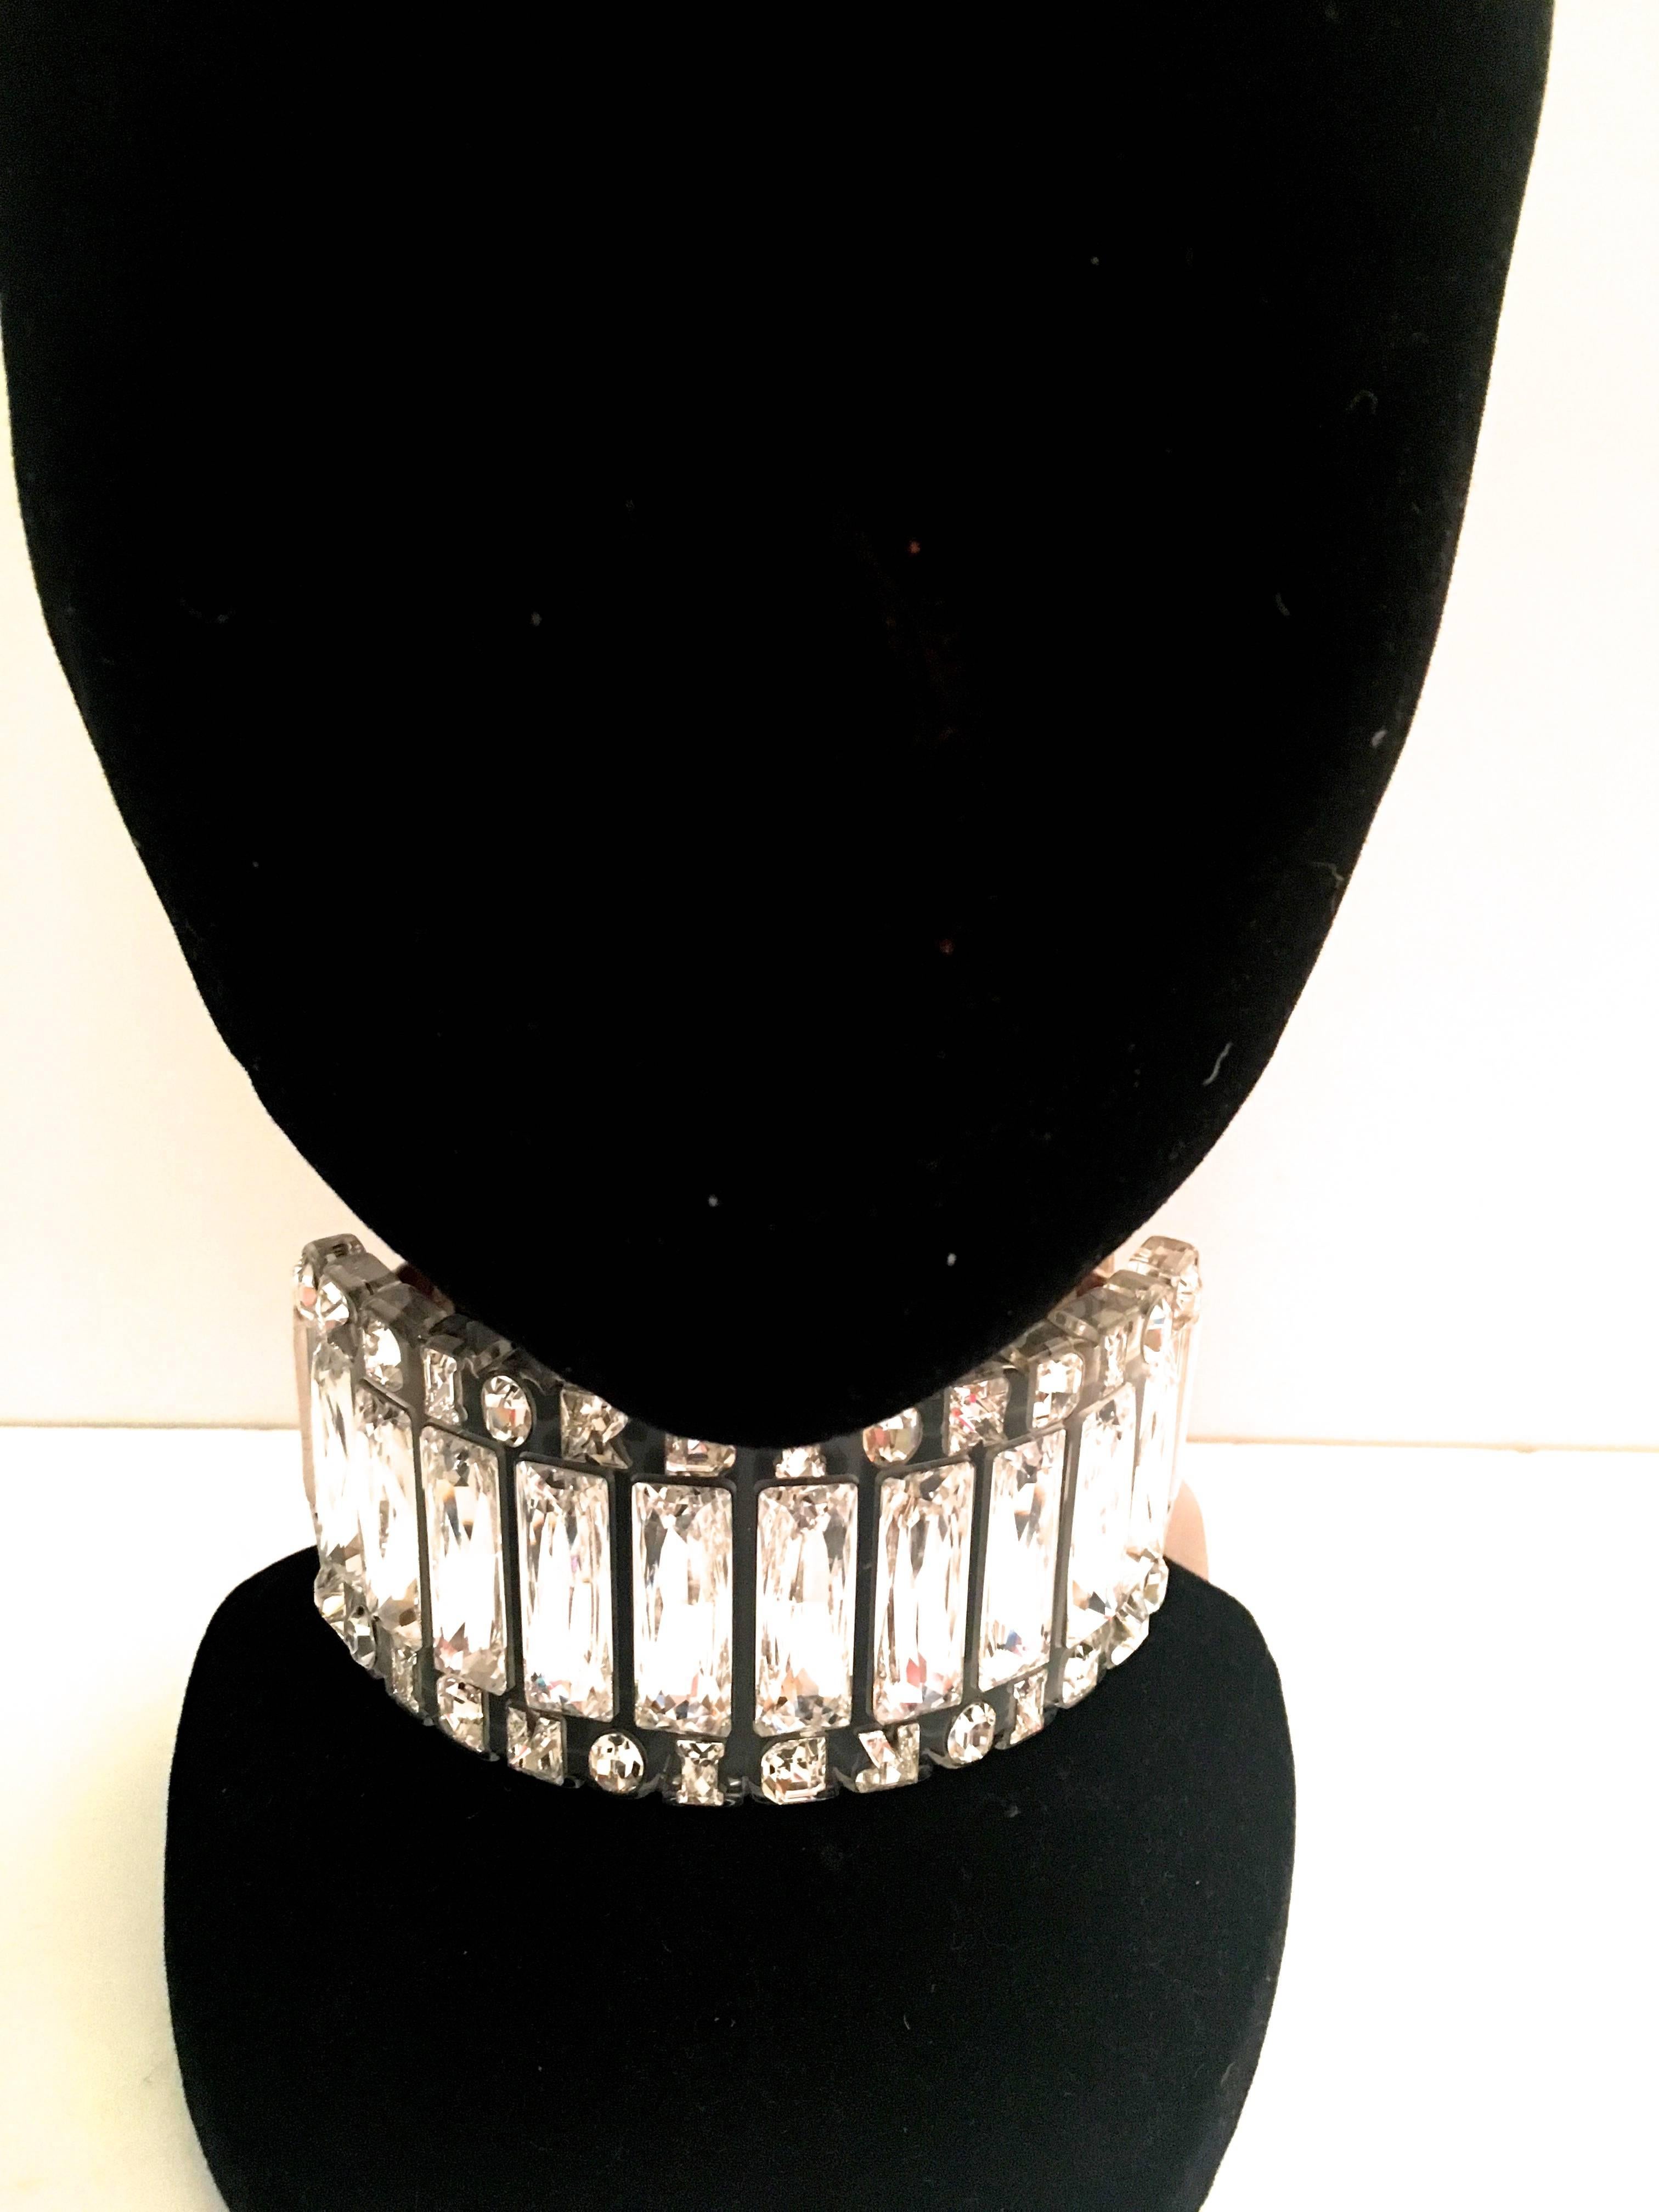 Presented here is a fabulous Christian Dior runway choker from the 1990's. This rhinestone choker necklace is comprised of a series of long baguette rhinestones across the front of the necklace. Bordering the top and bottom, DIOR is spelled out in